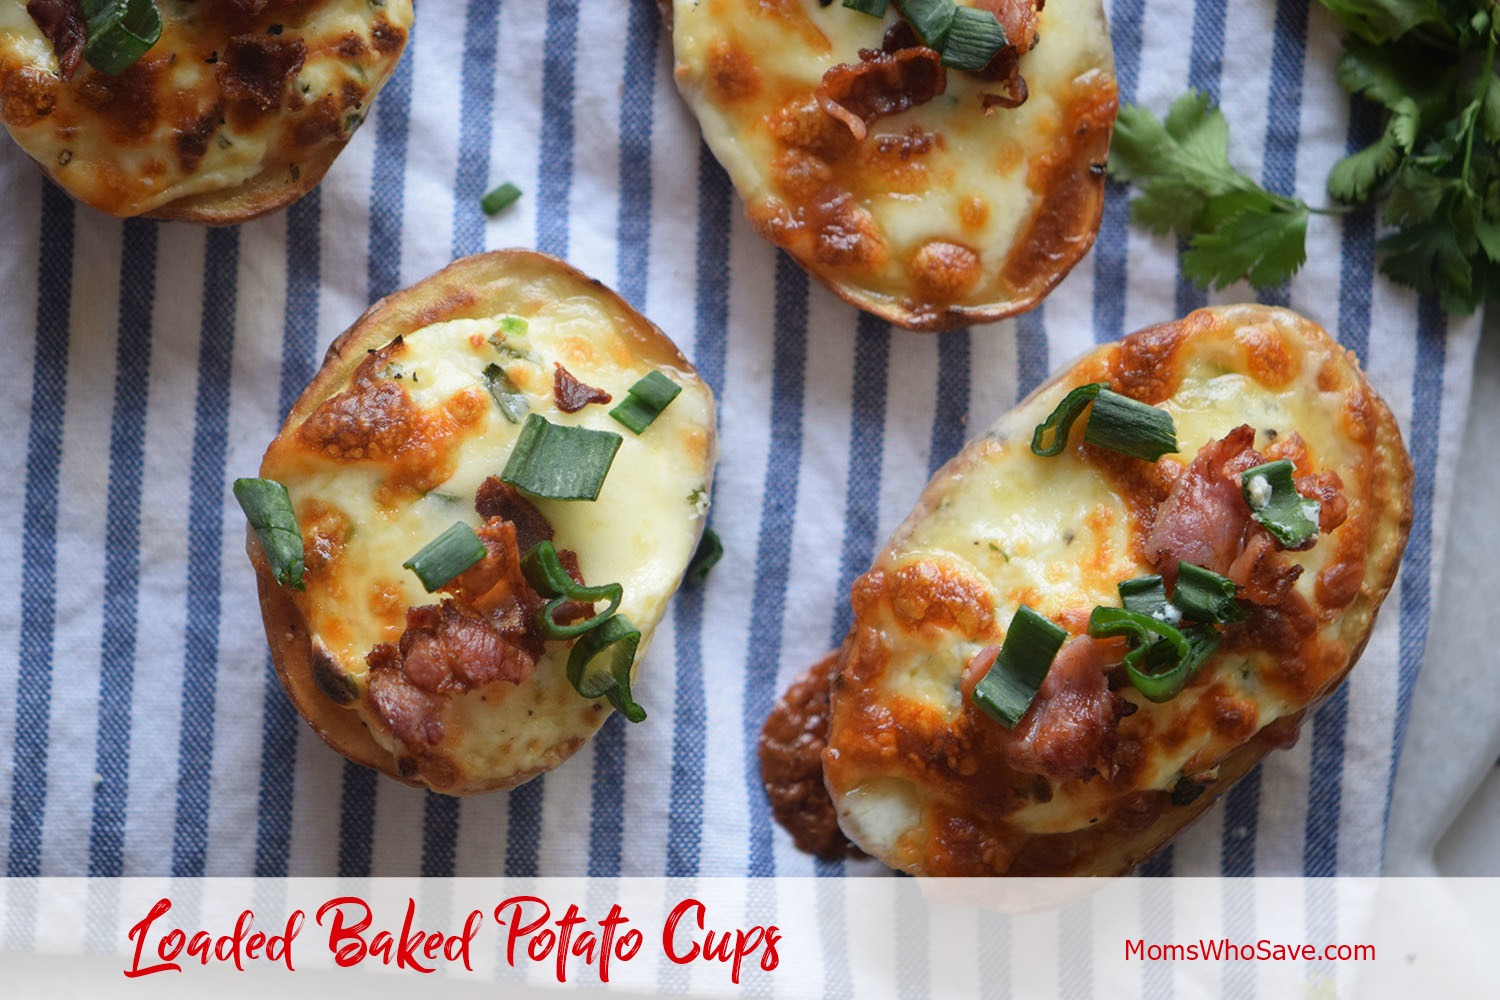 Loaded baked potato cups